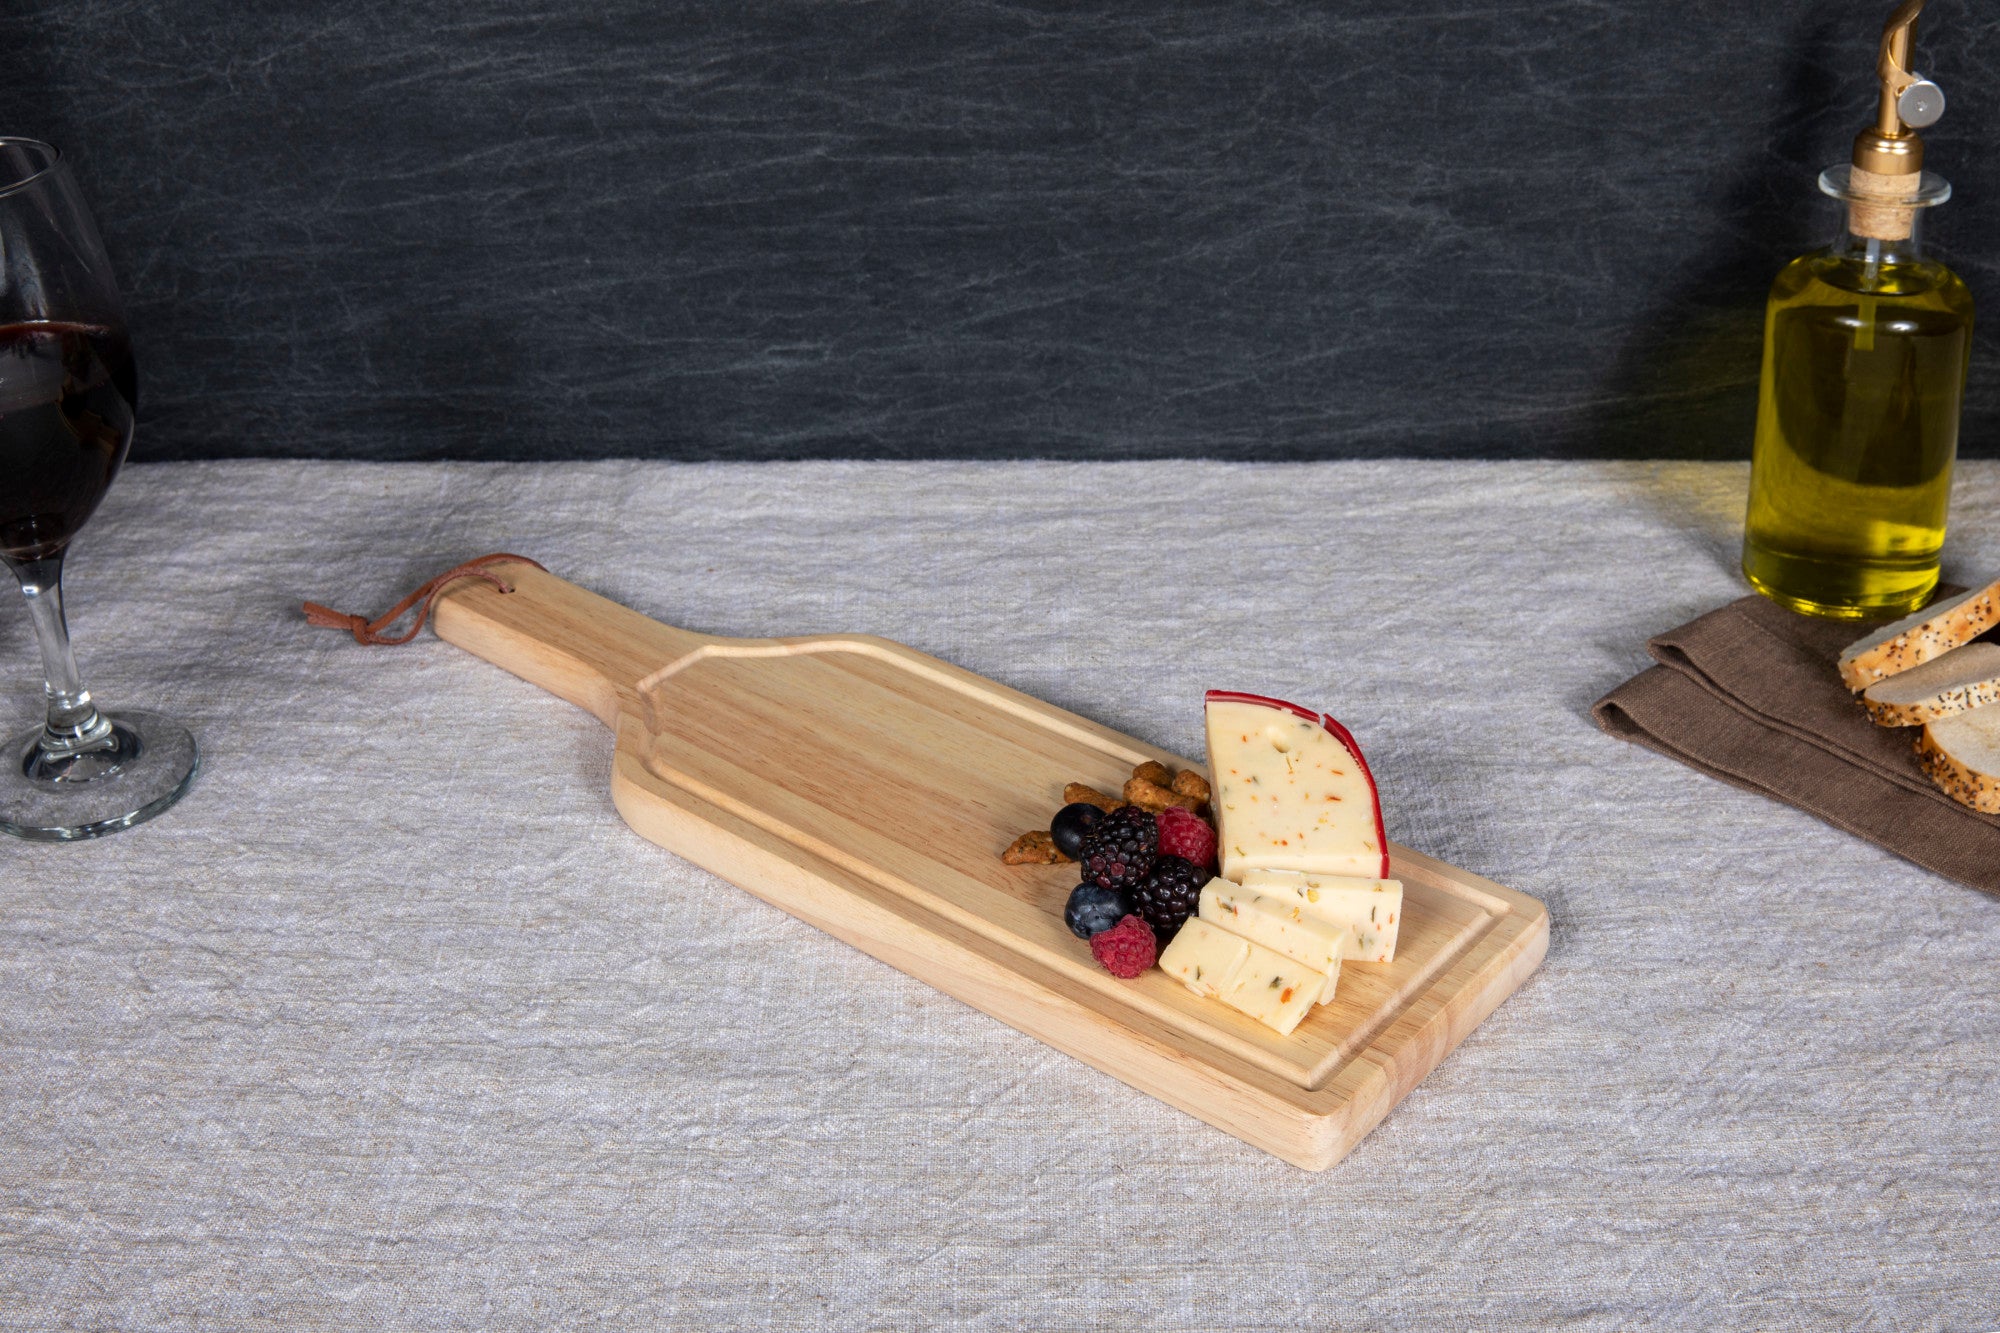 Pittsburgh Steelers - Botella Cheese Cutting Board & Serving Tray